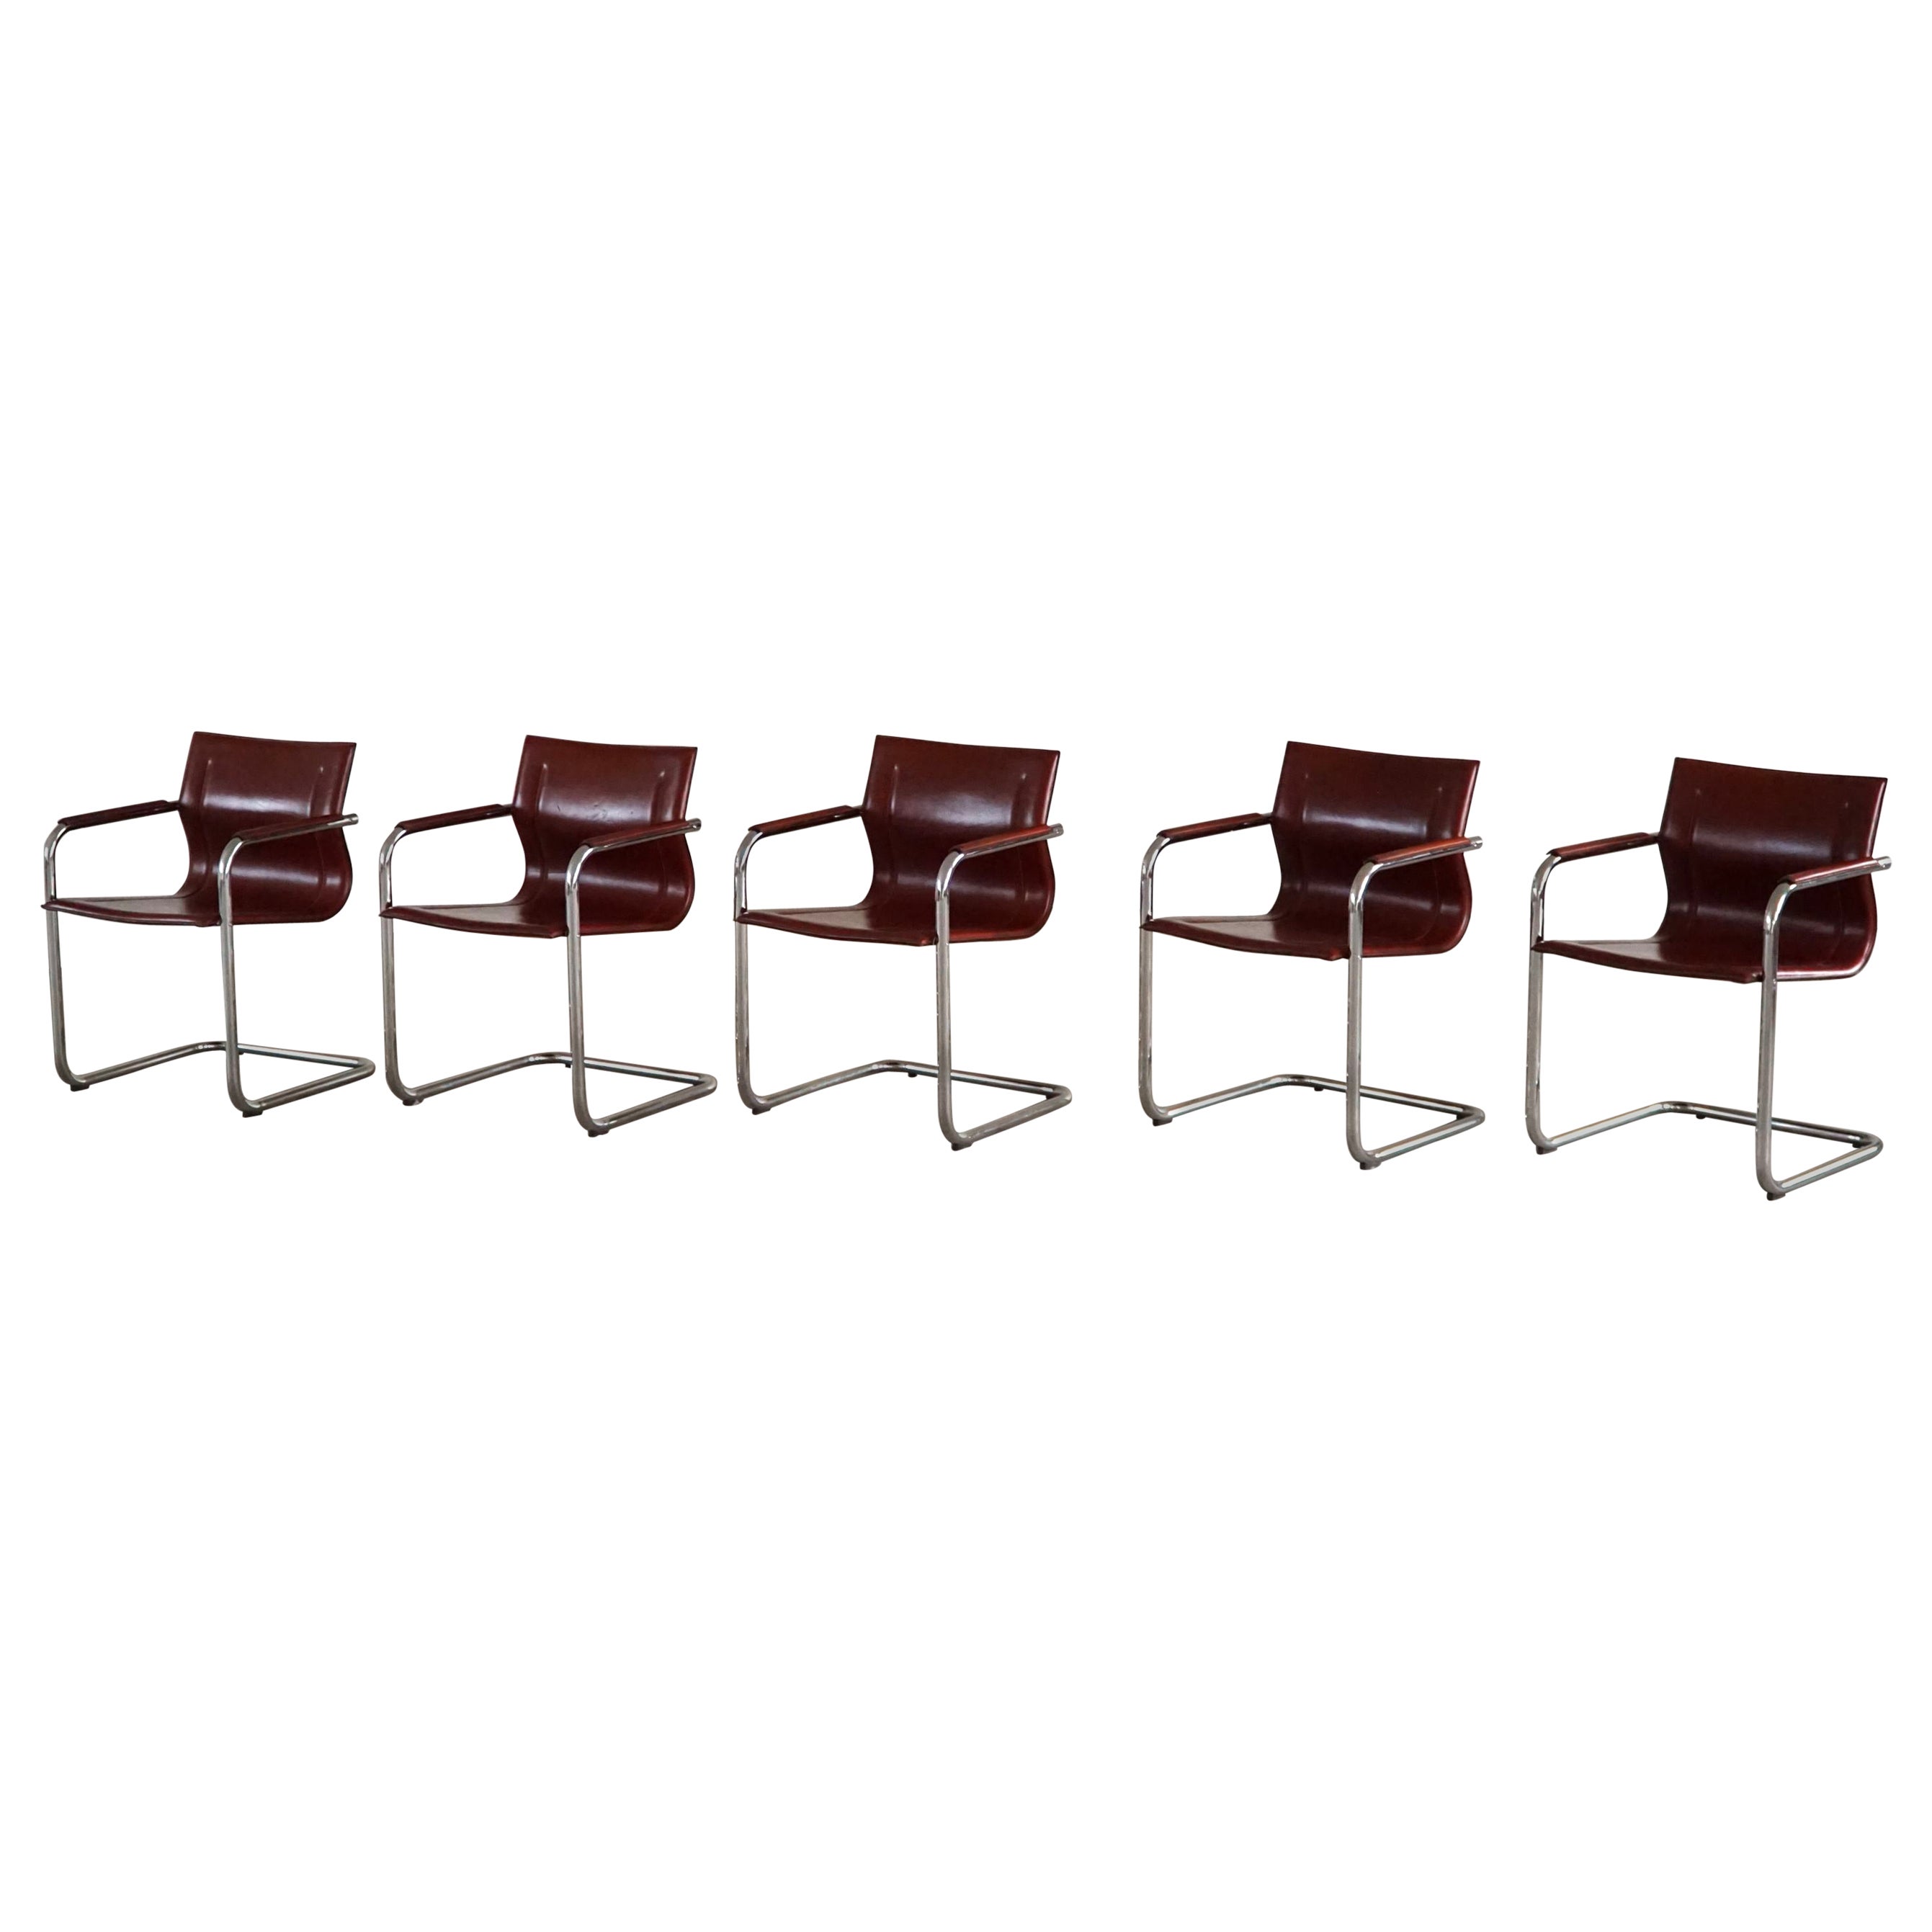 Set of 5 Cantilever Armchairs in Leather by Matteo Grassi, Model MG15, Italy 70s